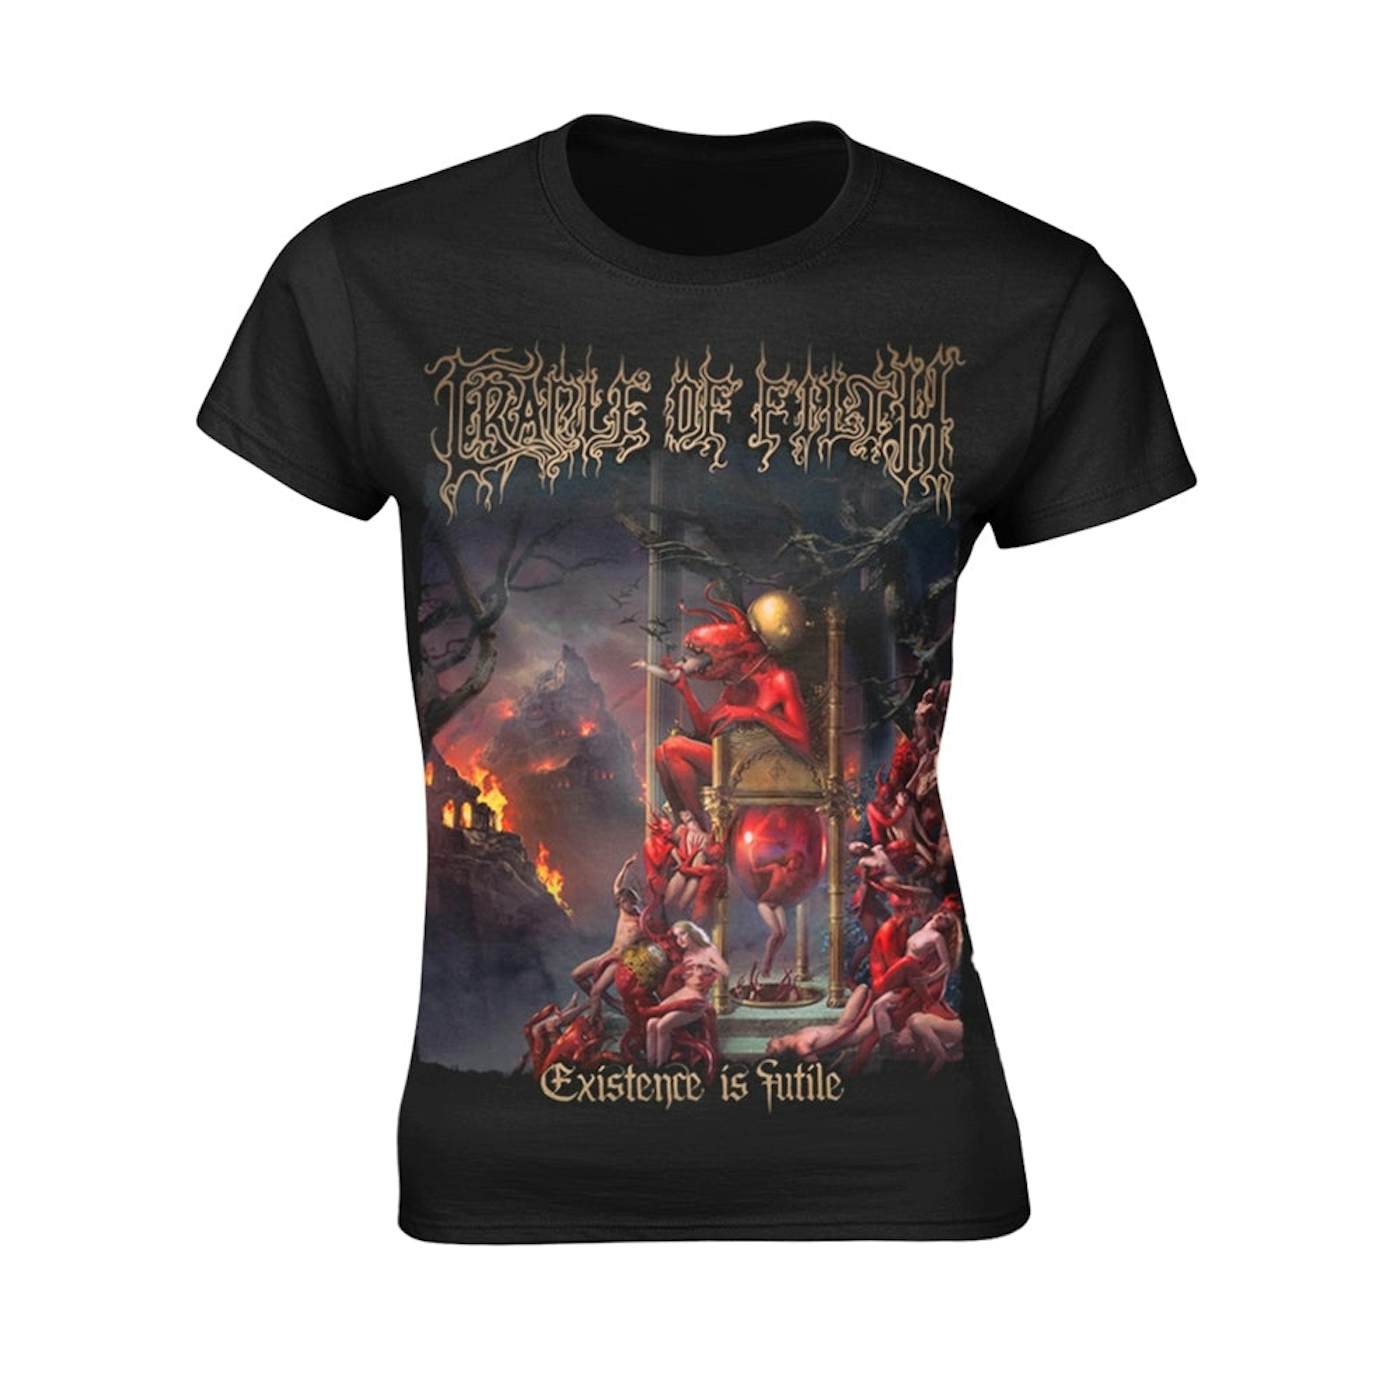 Cradle Of Filth Women's T Shirt - Existence (All Existence)